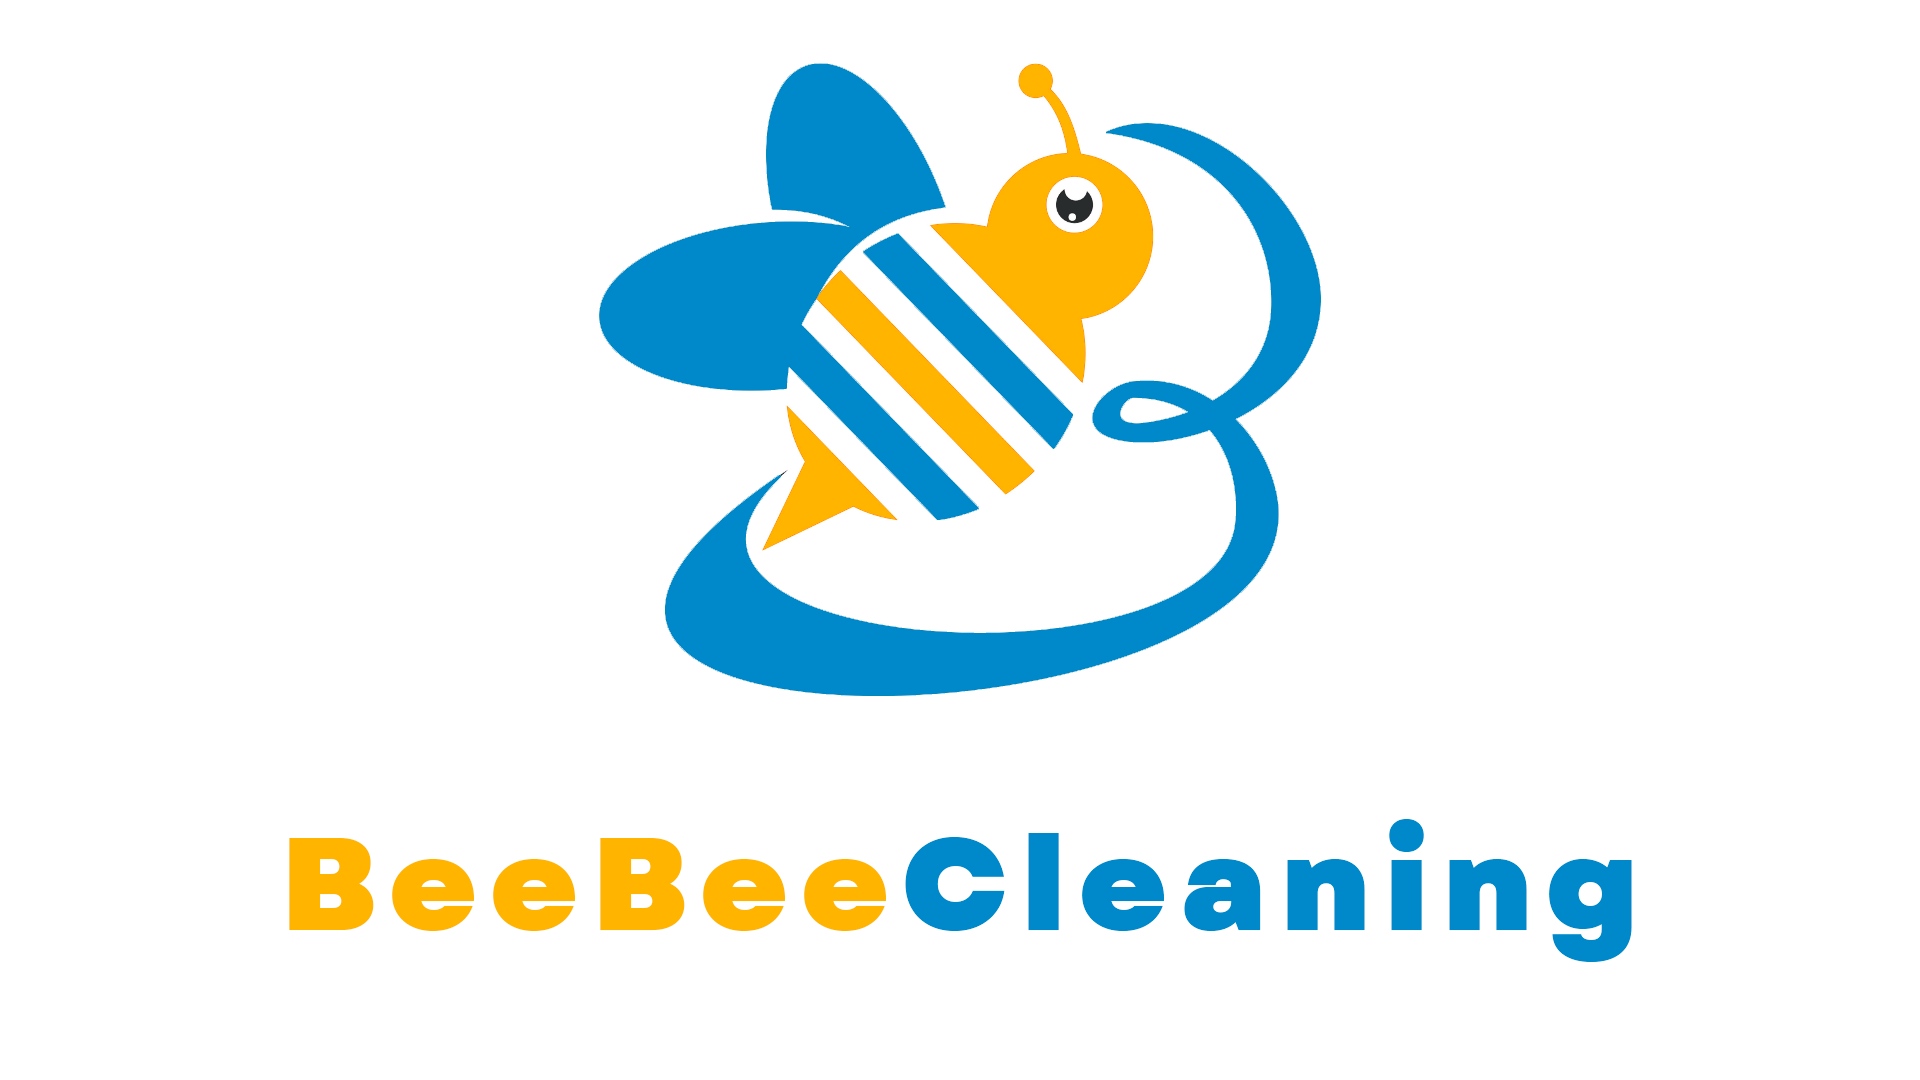 Bee Bee Cleaning